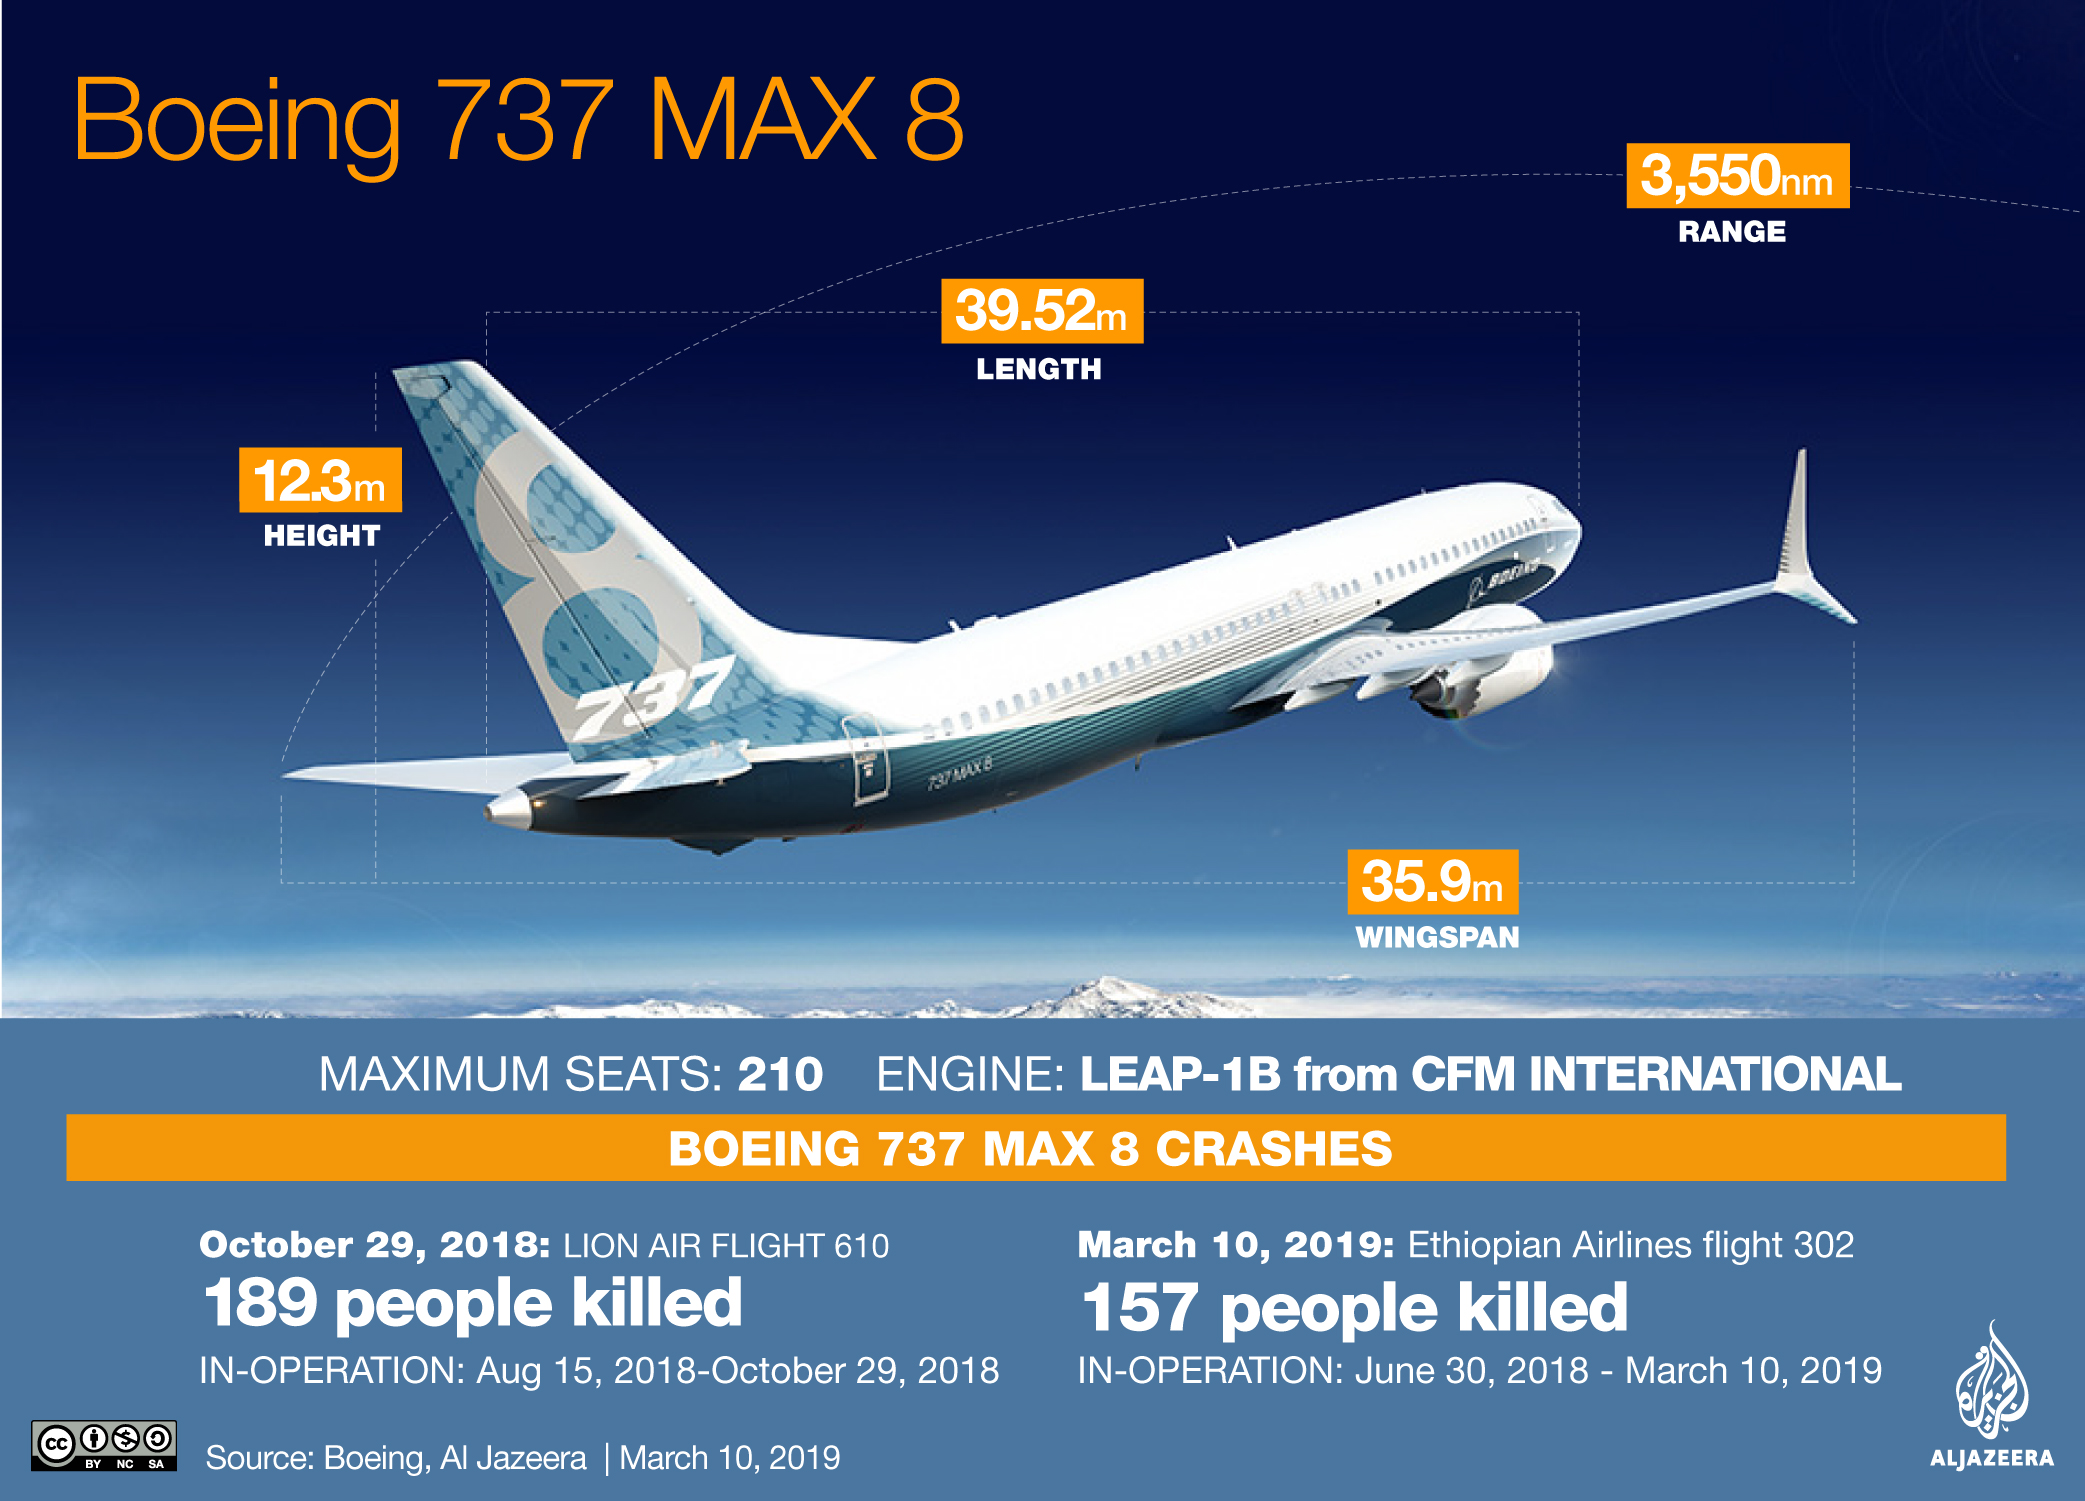 China, Ethiopia, Indonesia ground Boeing 737 MAX 8 after